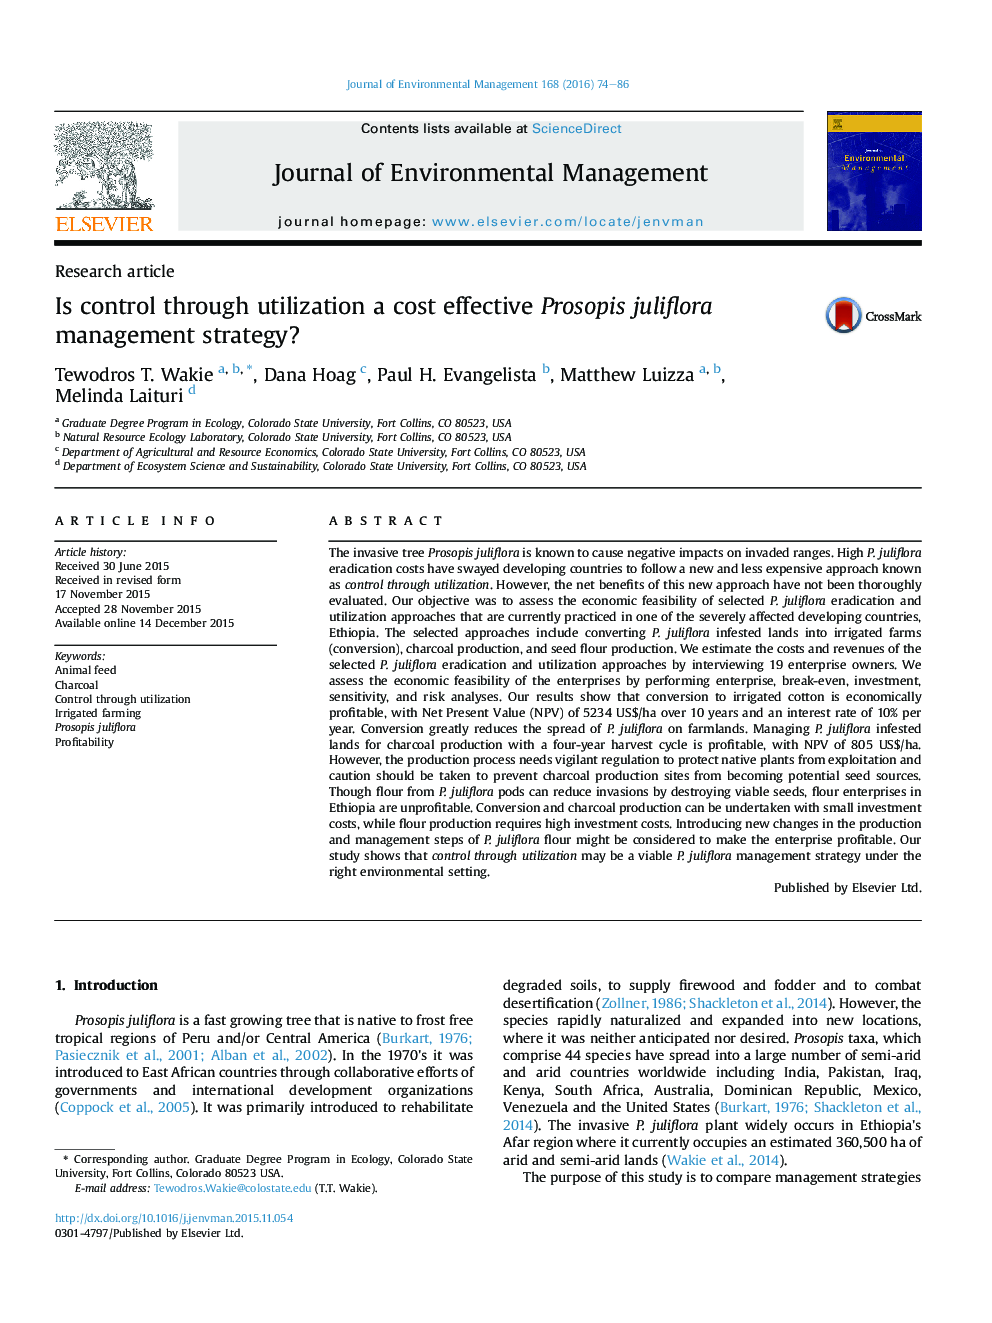 Is control through utilization a cost effective Prosopis juliflora management strategy?